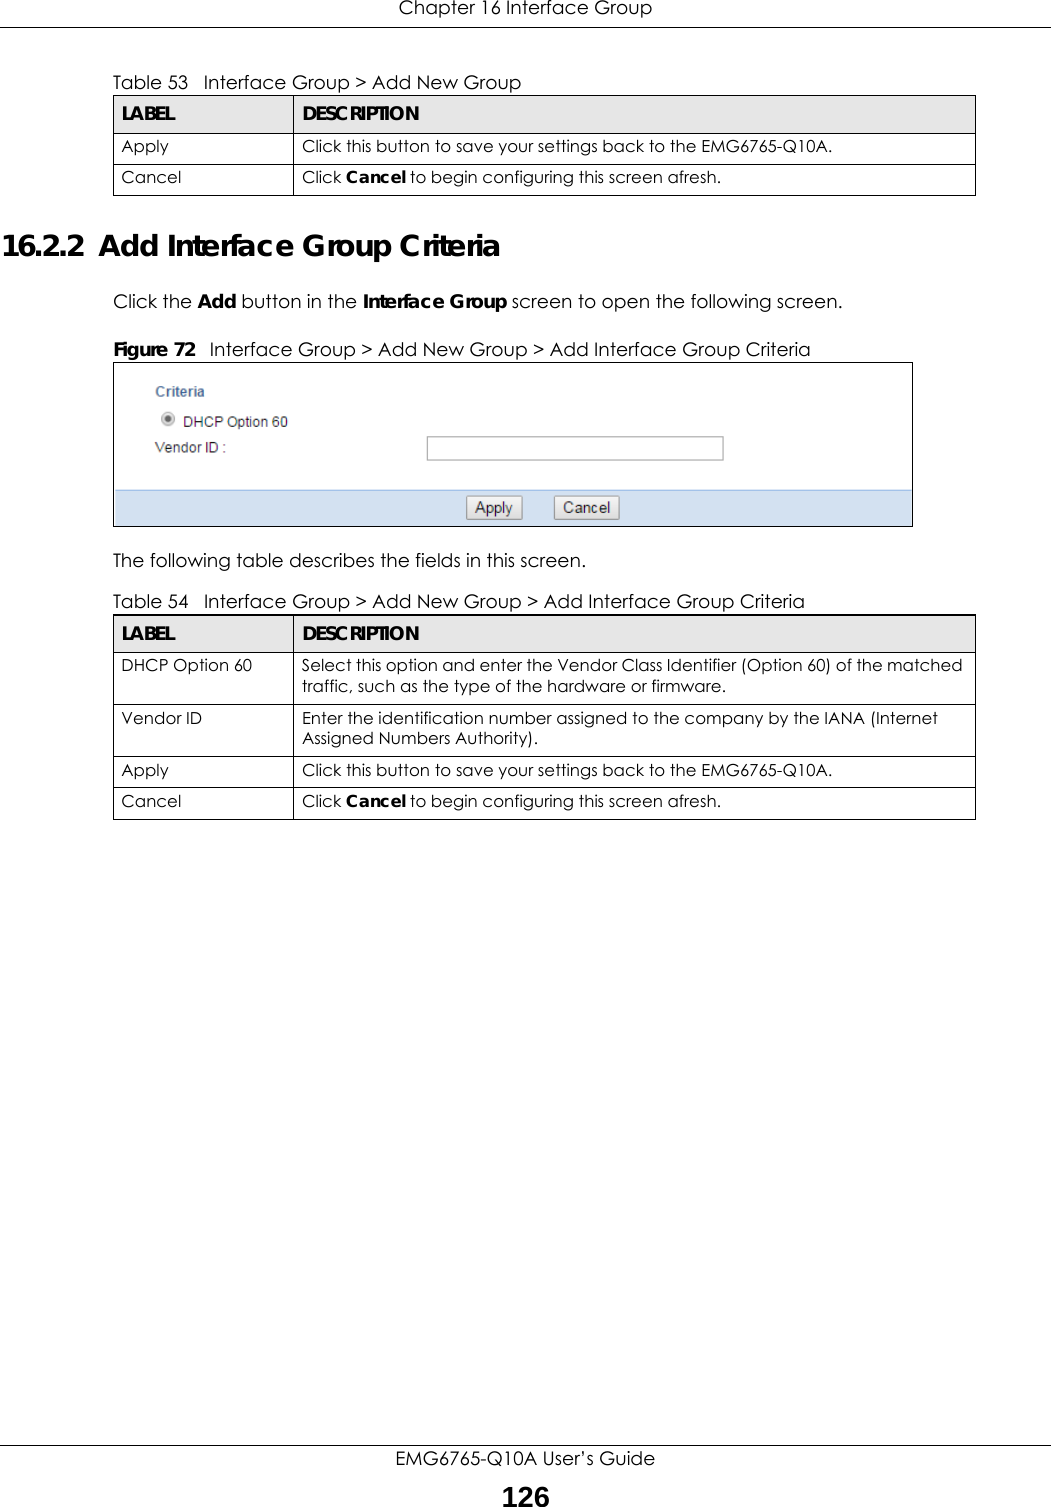 Chapter 16 Interface GroupEMG6765-Q10A User’s Guide12616.2.2  Add Interface Group CriteriaClick the Add button in the Interface Group screen to open the following screen. Figure 72   Interface Group &gt; Add New Group &gt; Add Interface Group Criteria The following table describes the fields in this screen. Apply Click this button to save your settings back to the EMG6765-Q10A.Cancel Click Cancel to begin configuring this screen afresh.Table 53   Interface Group &gt; Add New GroupLABEL DESCRIPTIONTable 54   Interface Group &gt; Add New Group &gt; Add Interface Group CriteriaLABEL DESCRIPTIONDHCP Option 60 Select this option and enter the Vendor Class Identifier (Option 60) of the matched traffic, such as the type of the hardware or firmware.Vendor ID Enter the identification number assigned to the company by the IANA (Internet Assigned Numbers Authority).Apply Click this button to save your settings back to the EMG6765-Q10A.Cancel Click Cancel to begin configuring this screen afresh.